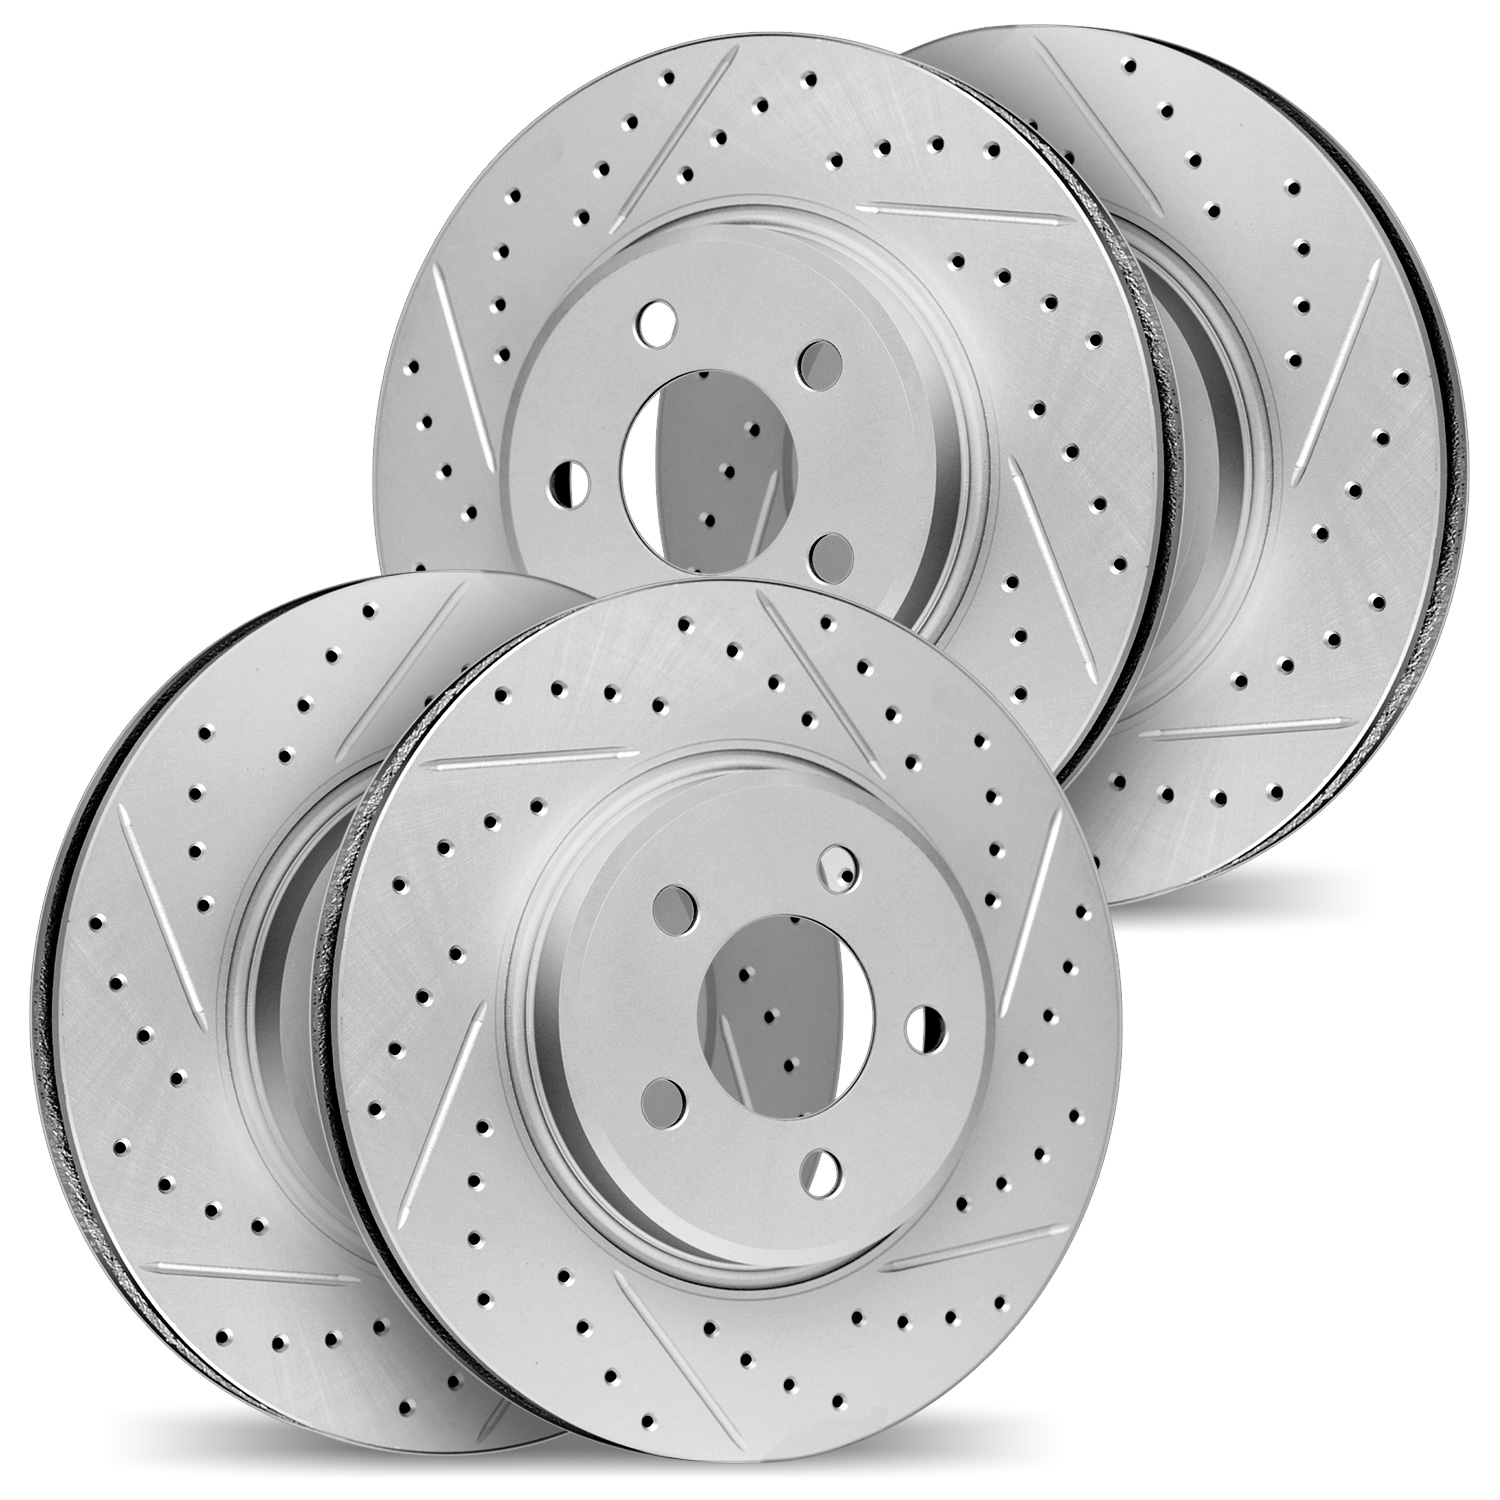 2004-11003 Geoperformance Drilled/Slotted Brake Rotors, 2014-2017 Land Rover, Position: Front and Rear